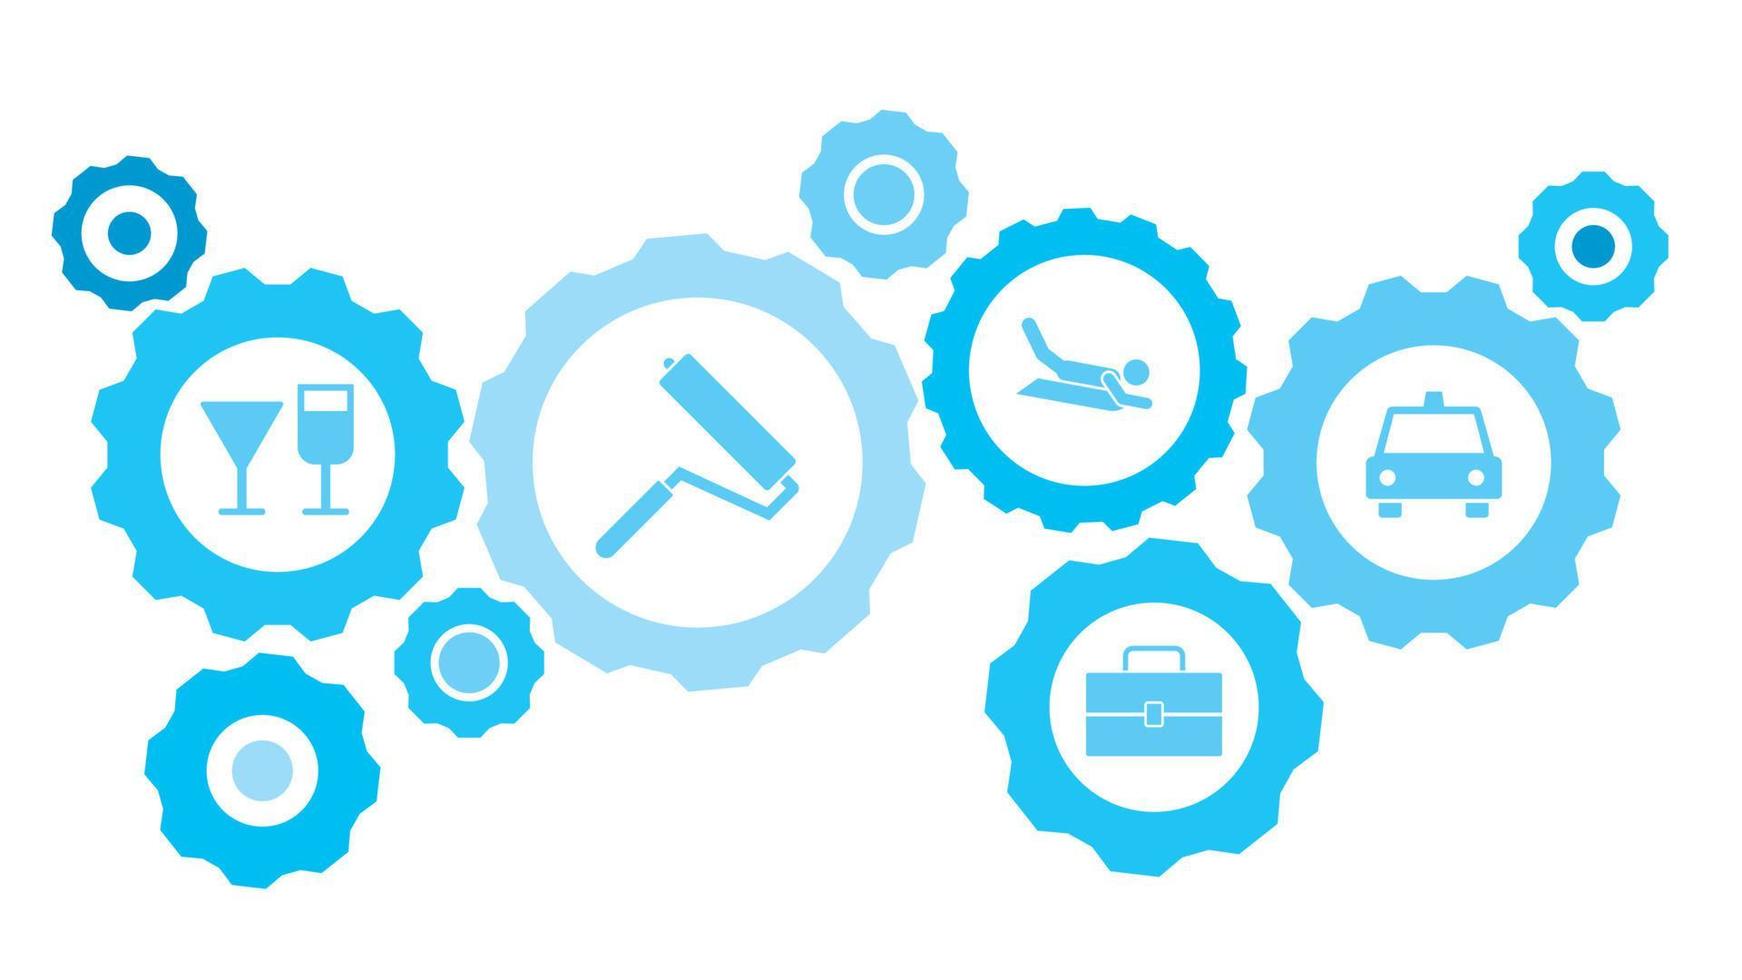 Taxi gear blue icon set. Abstract background with connected gears and icons for logistic, service, shipping, distribution, transport, market, communicate concepts vector